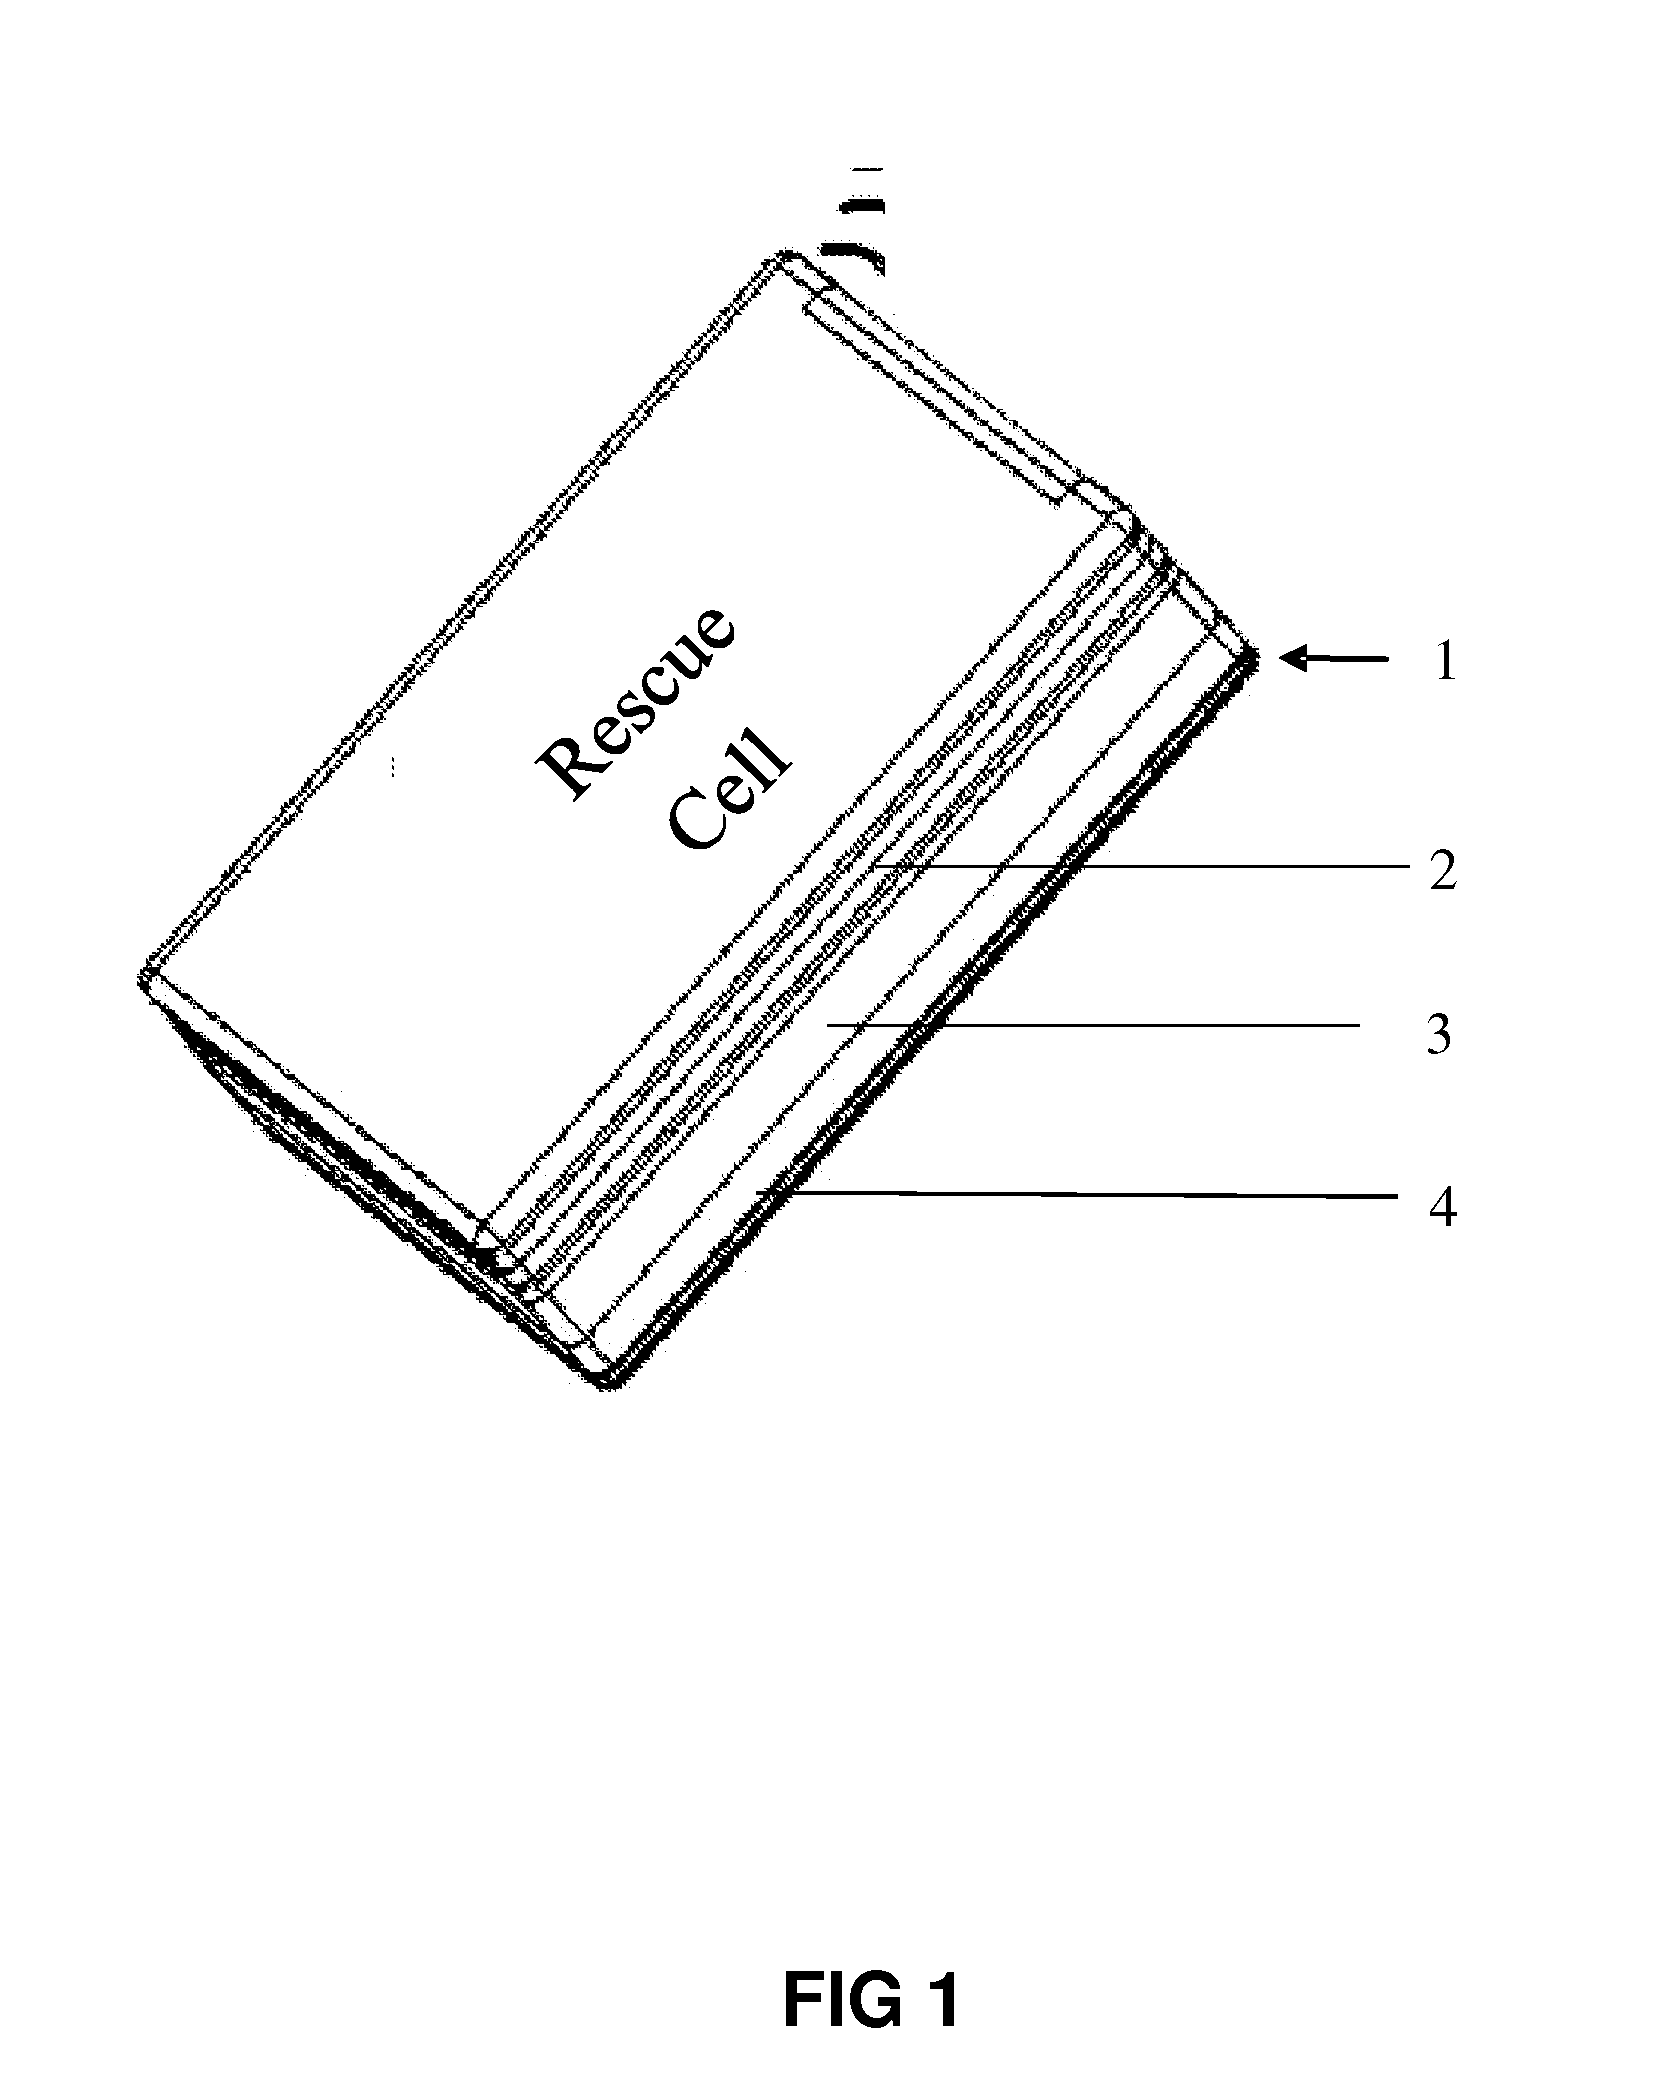 Method and apparatus of remotely-operated automated external defribrallator incorporated into a handheld device